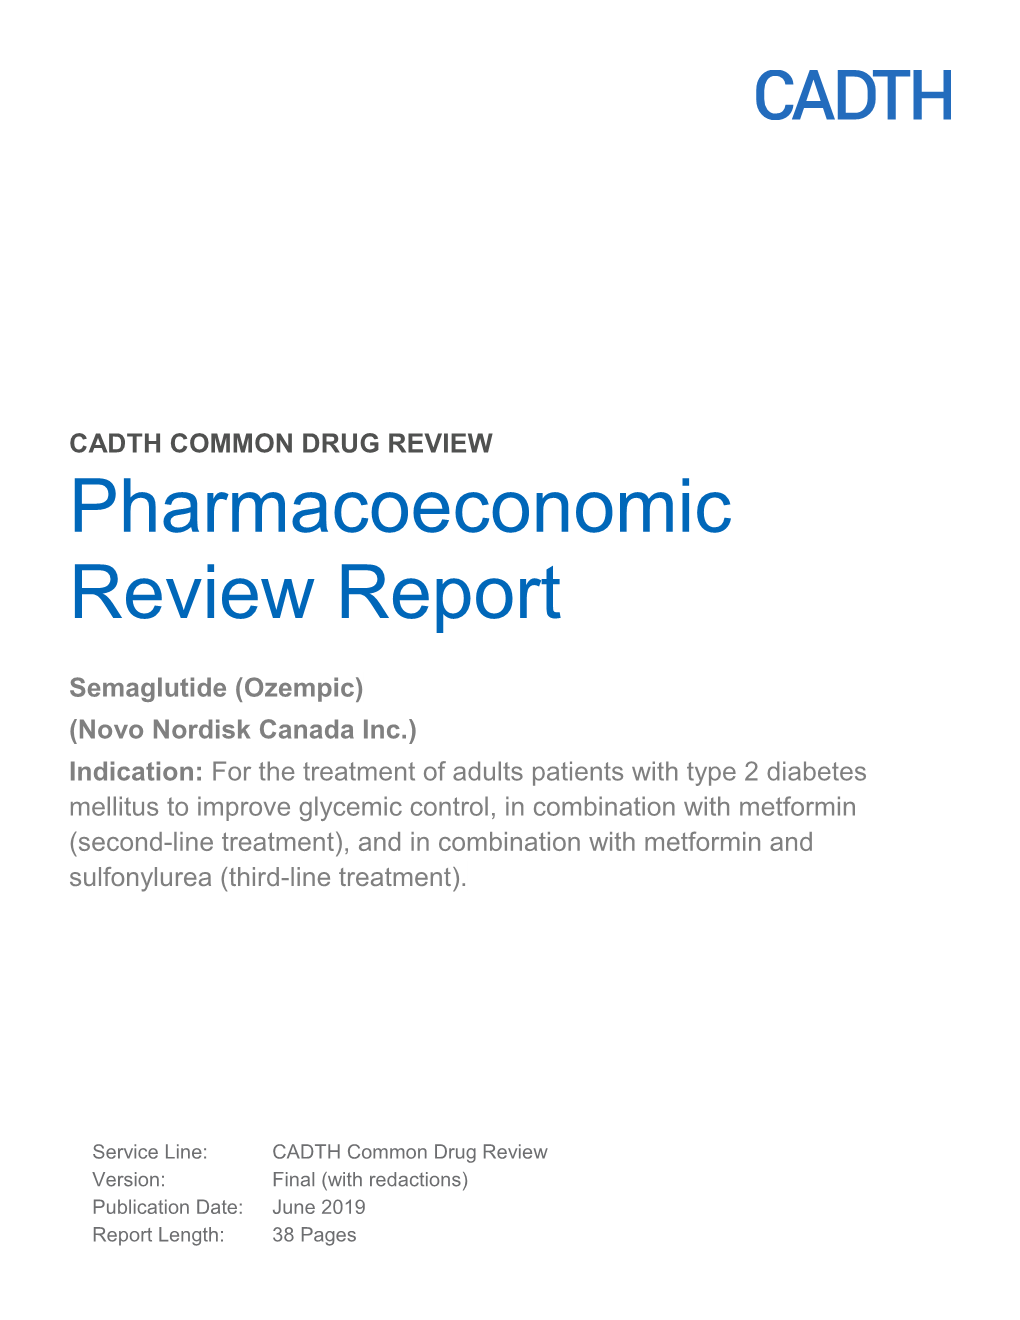 CDR Pharmacoeconomic Review Report for Ozempic